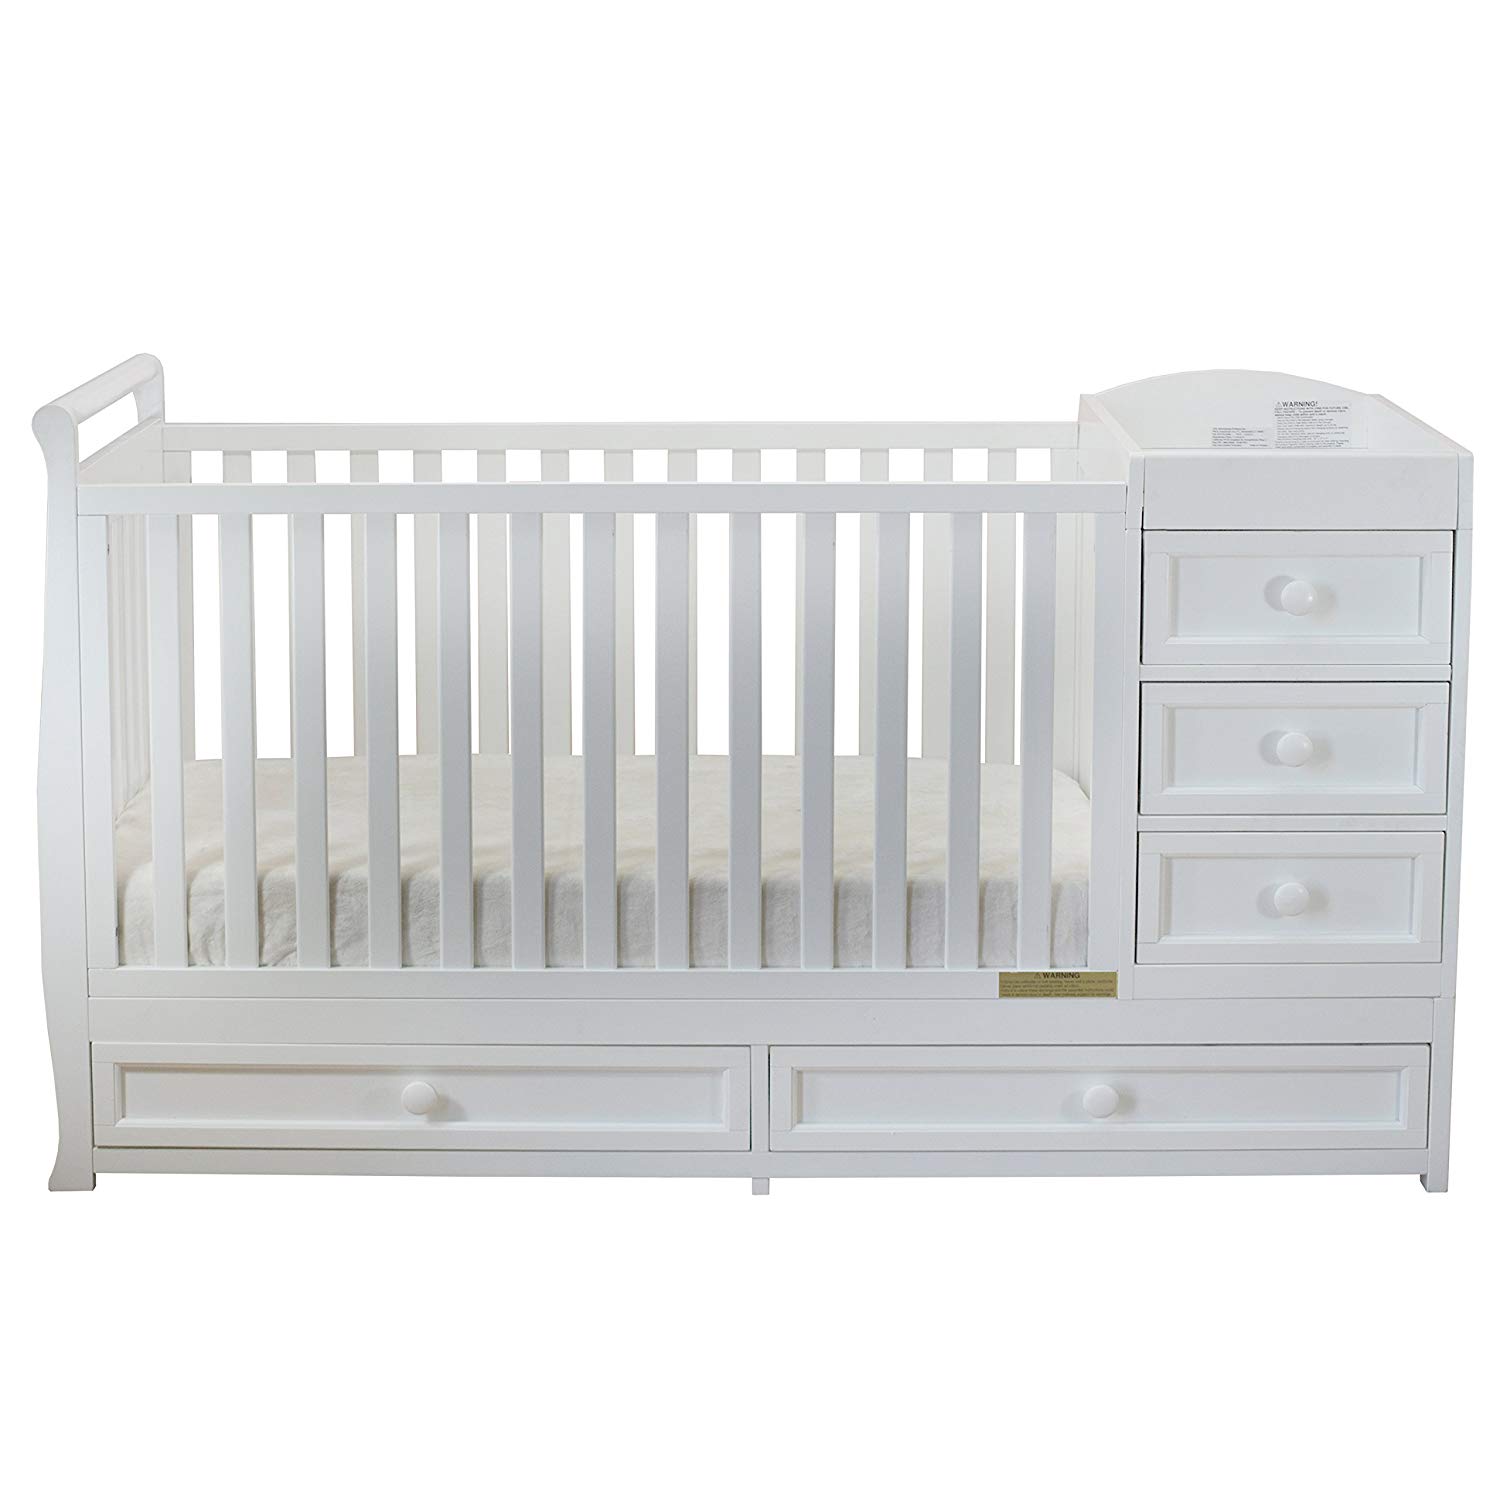 Baby beds amazon.com: athena daphne convertible cot and changing table, white: baby BHNQCFJ